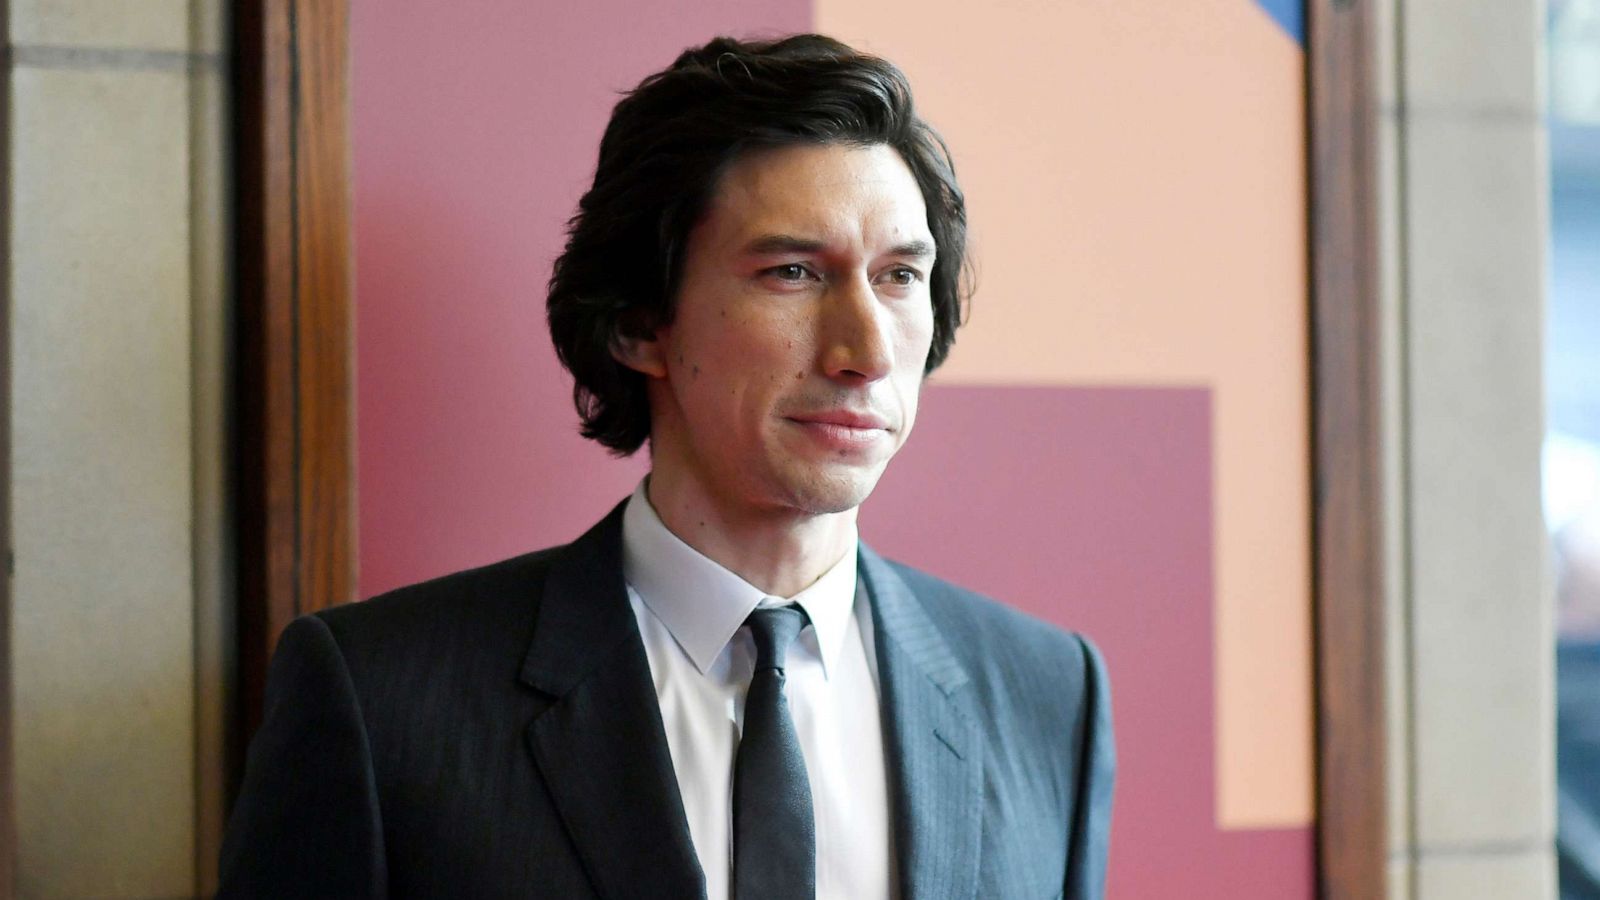 PHOTO: Adam Driver attends the "Marriage Story" premiere during the 2019 Toronto International Film Festival at Winter Garden Theatre on Sept. 08, 2019 in Toronto.